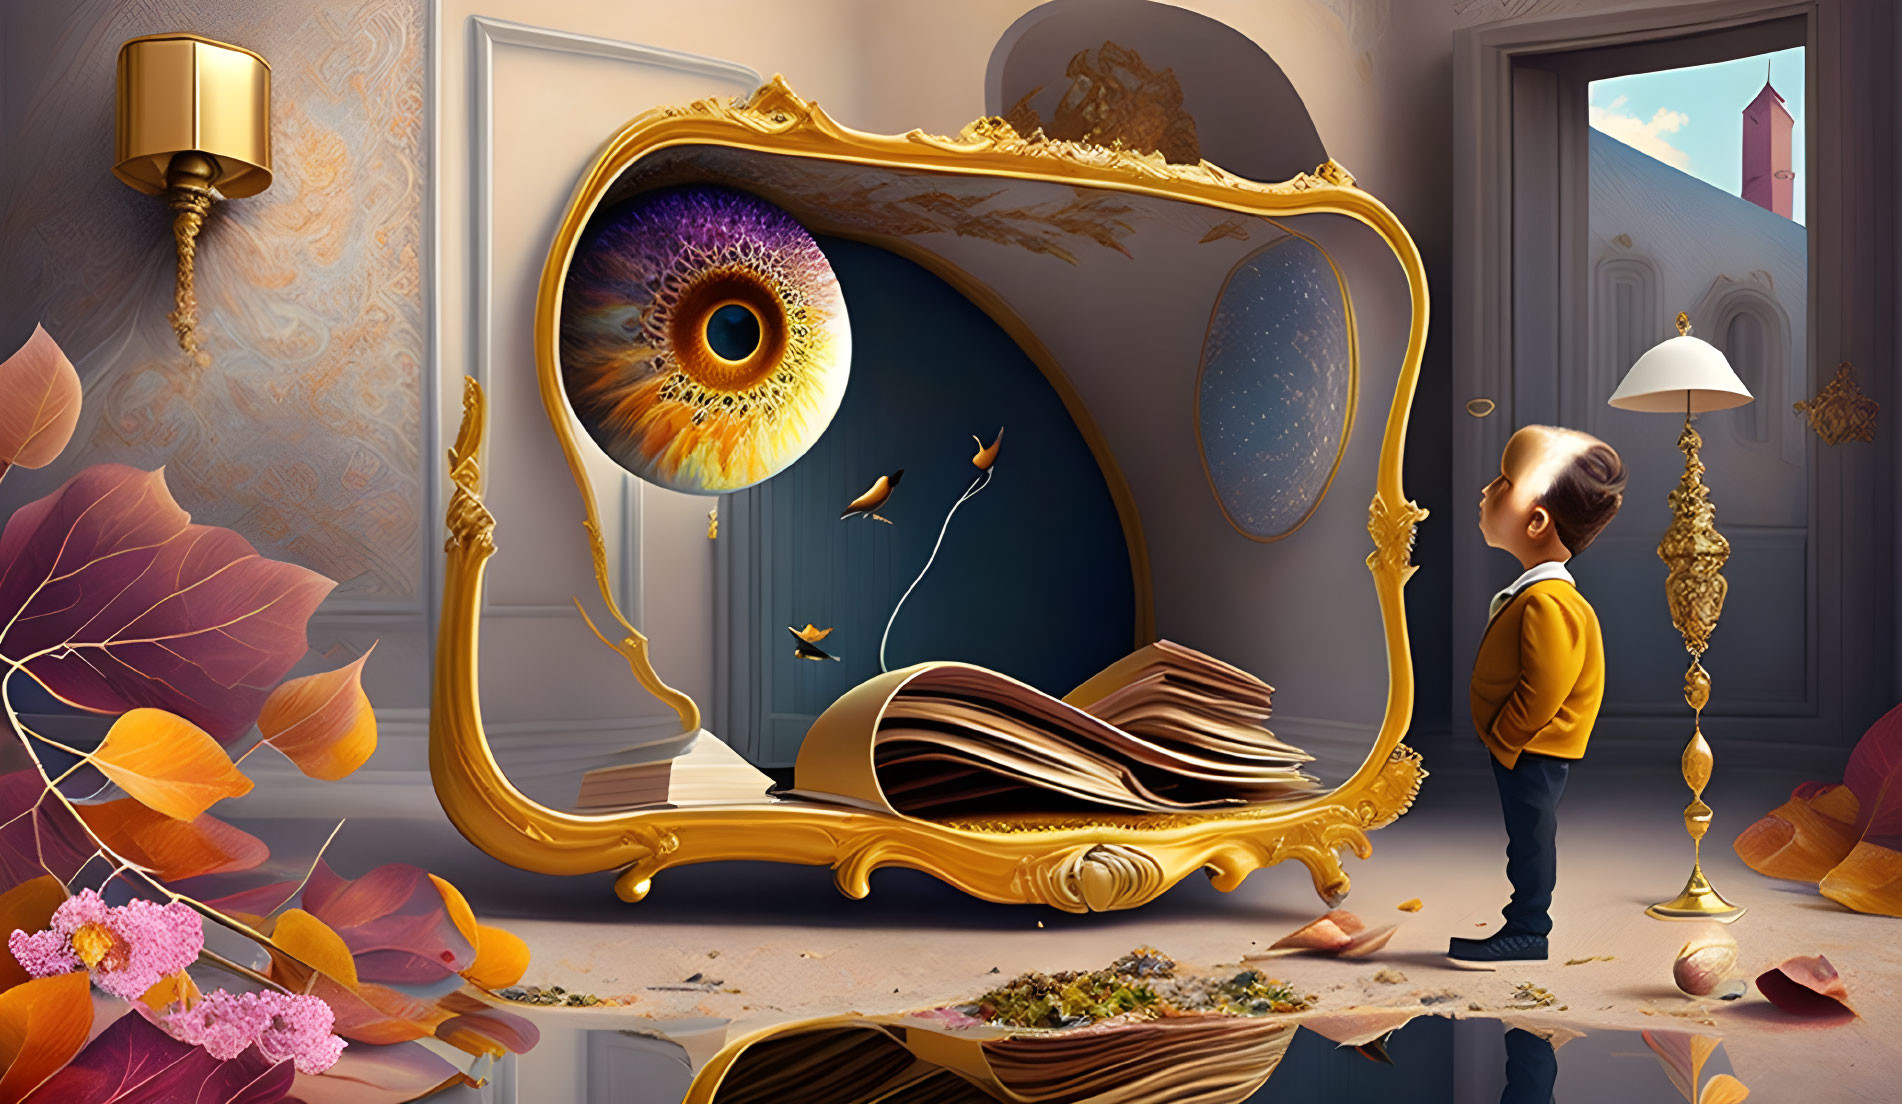 Child in yellow sweater gazes at surreal eye-shaped mirror in ornate room.